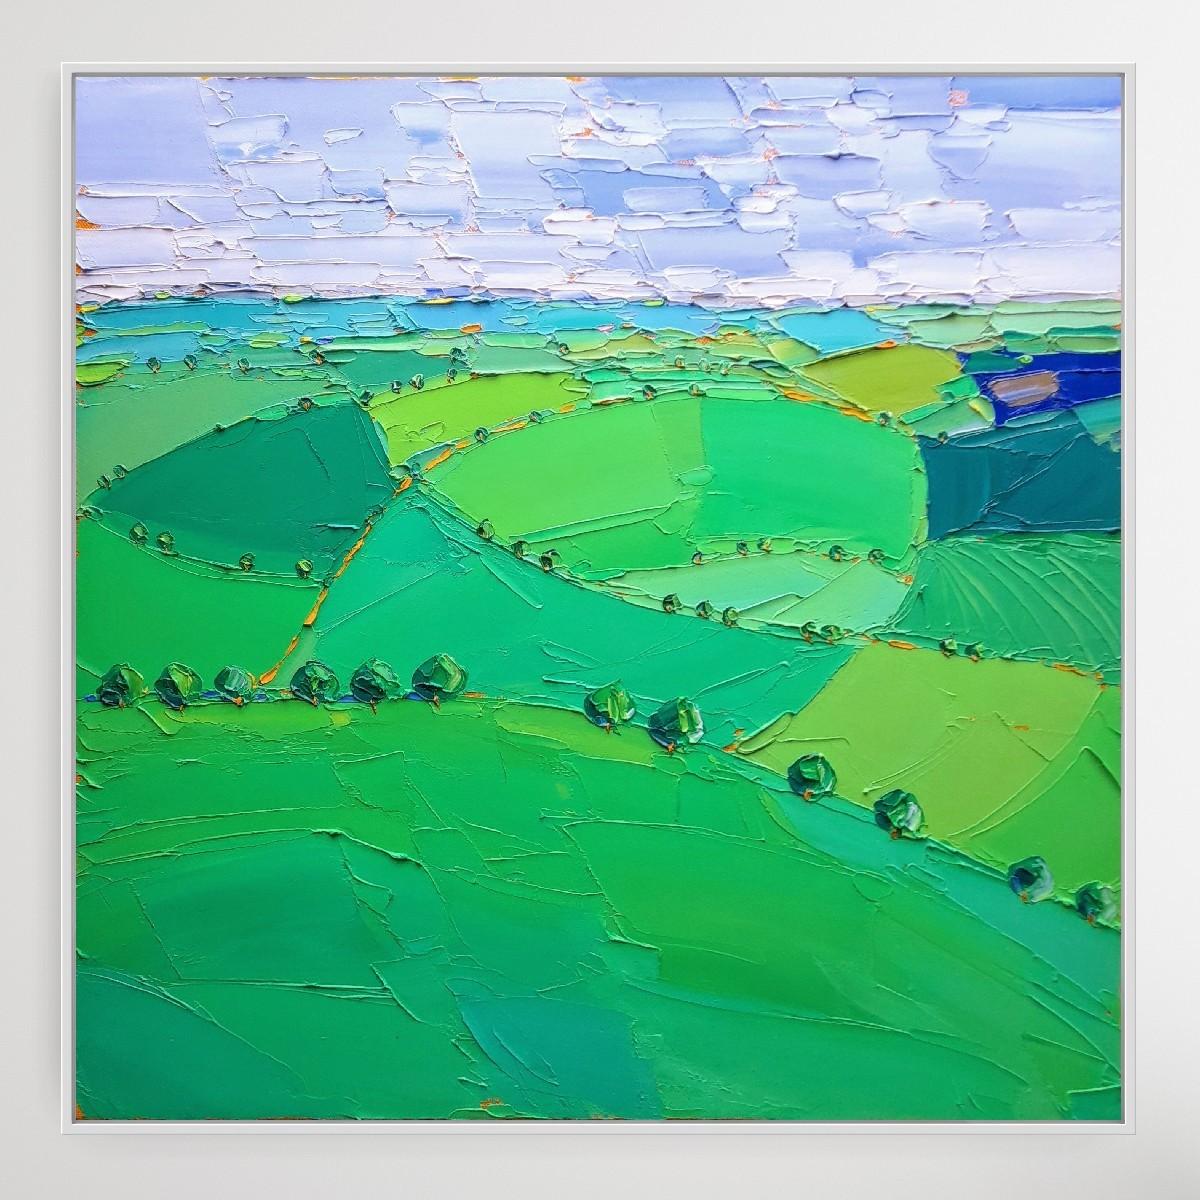 Cotswold Fields II, Georgie Dowling, Contemporary artist, Cotswold art, 2022 - Green Landscape Painting by Georgie Dowling 